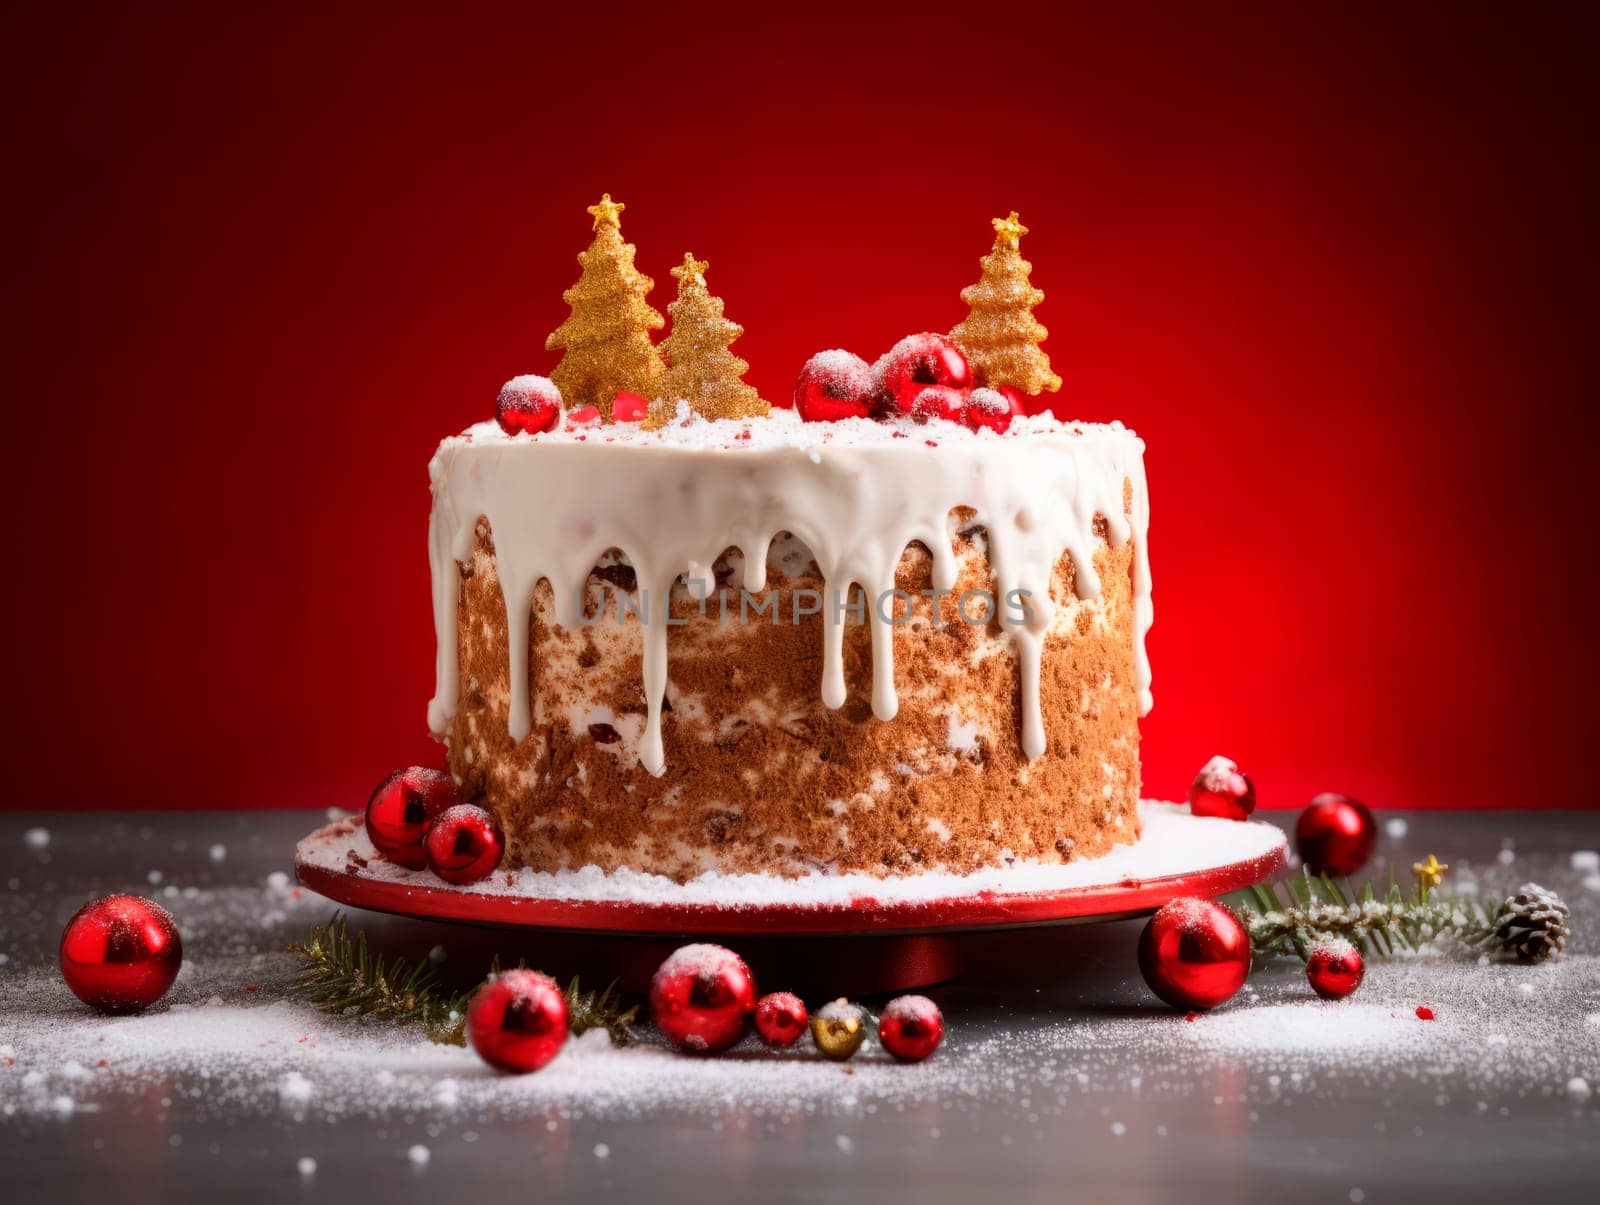 Beautiful Christmas cake decorated with berries. Red background. Christmas dessert.